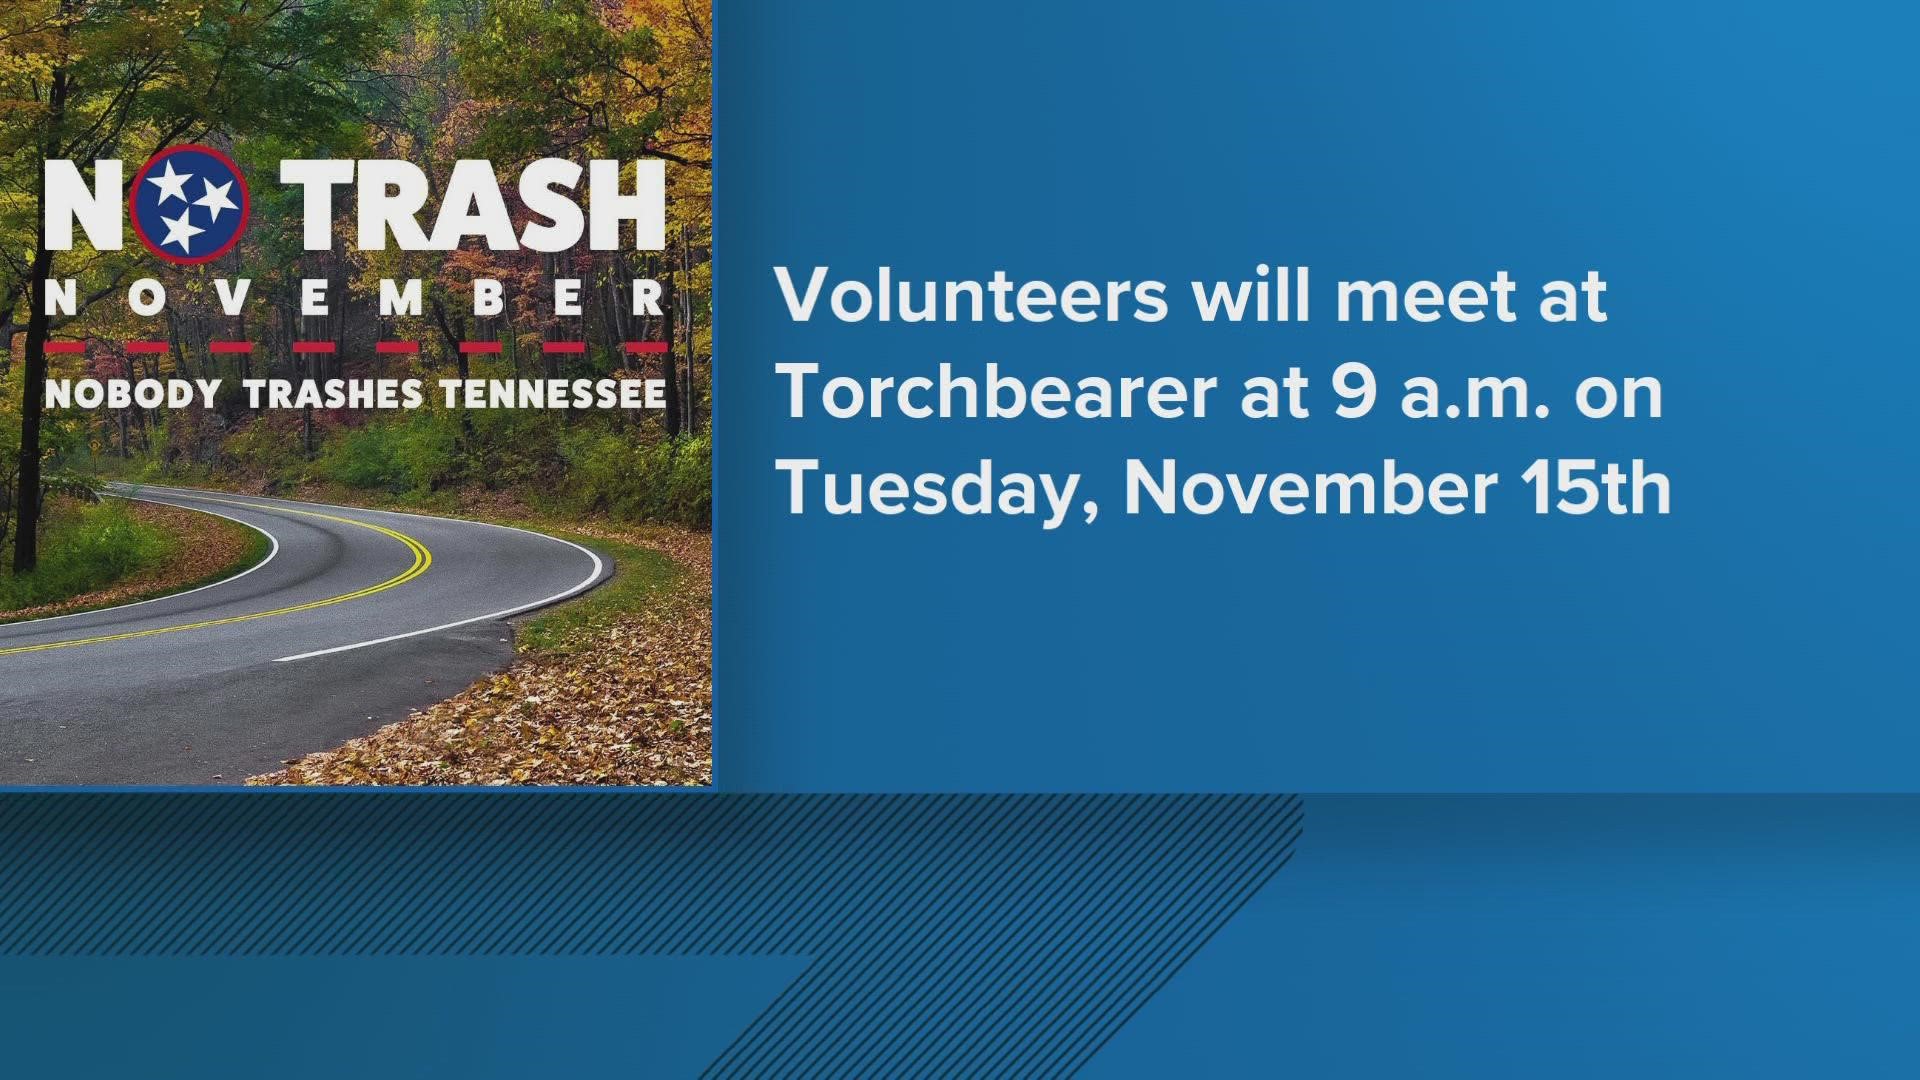 The Tennessee Department of Transportation has a campaign that helps keep Tennessee clean. On Tuesday, they are partnering with UT to clean up the campus.